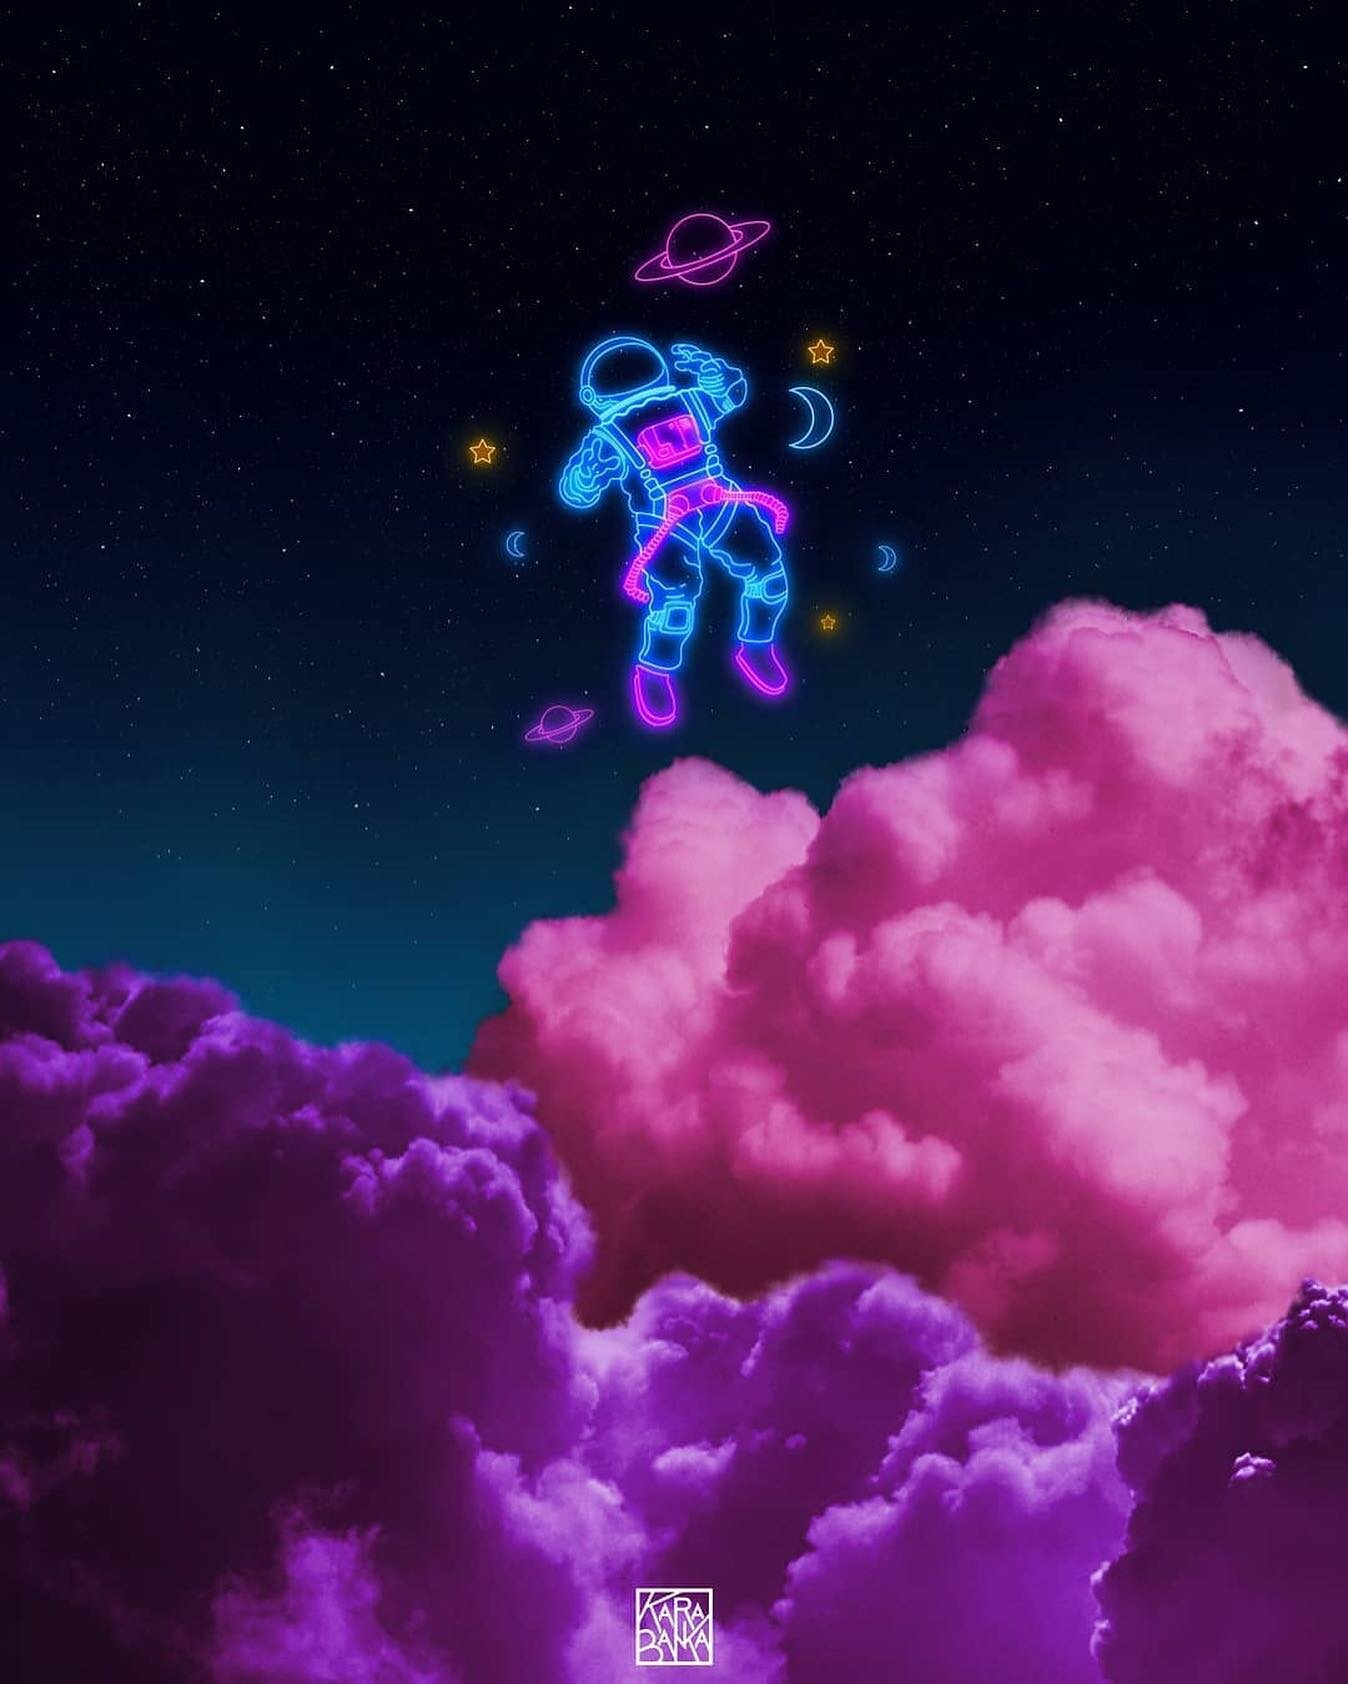 We don&rsquo;t mind a good float through the stars ⭐️

.
.
.
repost @karabanka: Cotton Candy {#Karabanka}

#scifi #scifiart #space #spaceart #astronaut #astronautart #outerspace #spacevibes #purplevibes #pinkvibes